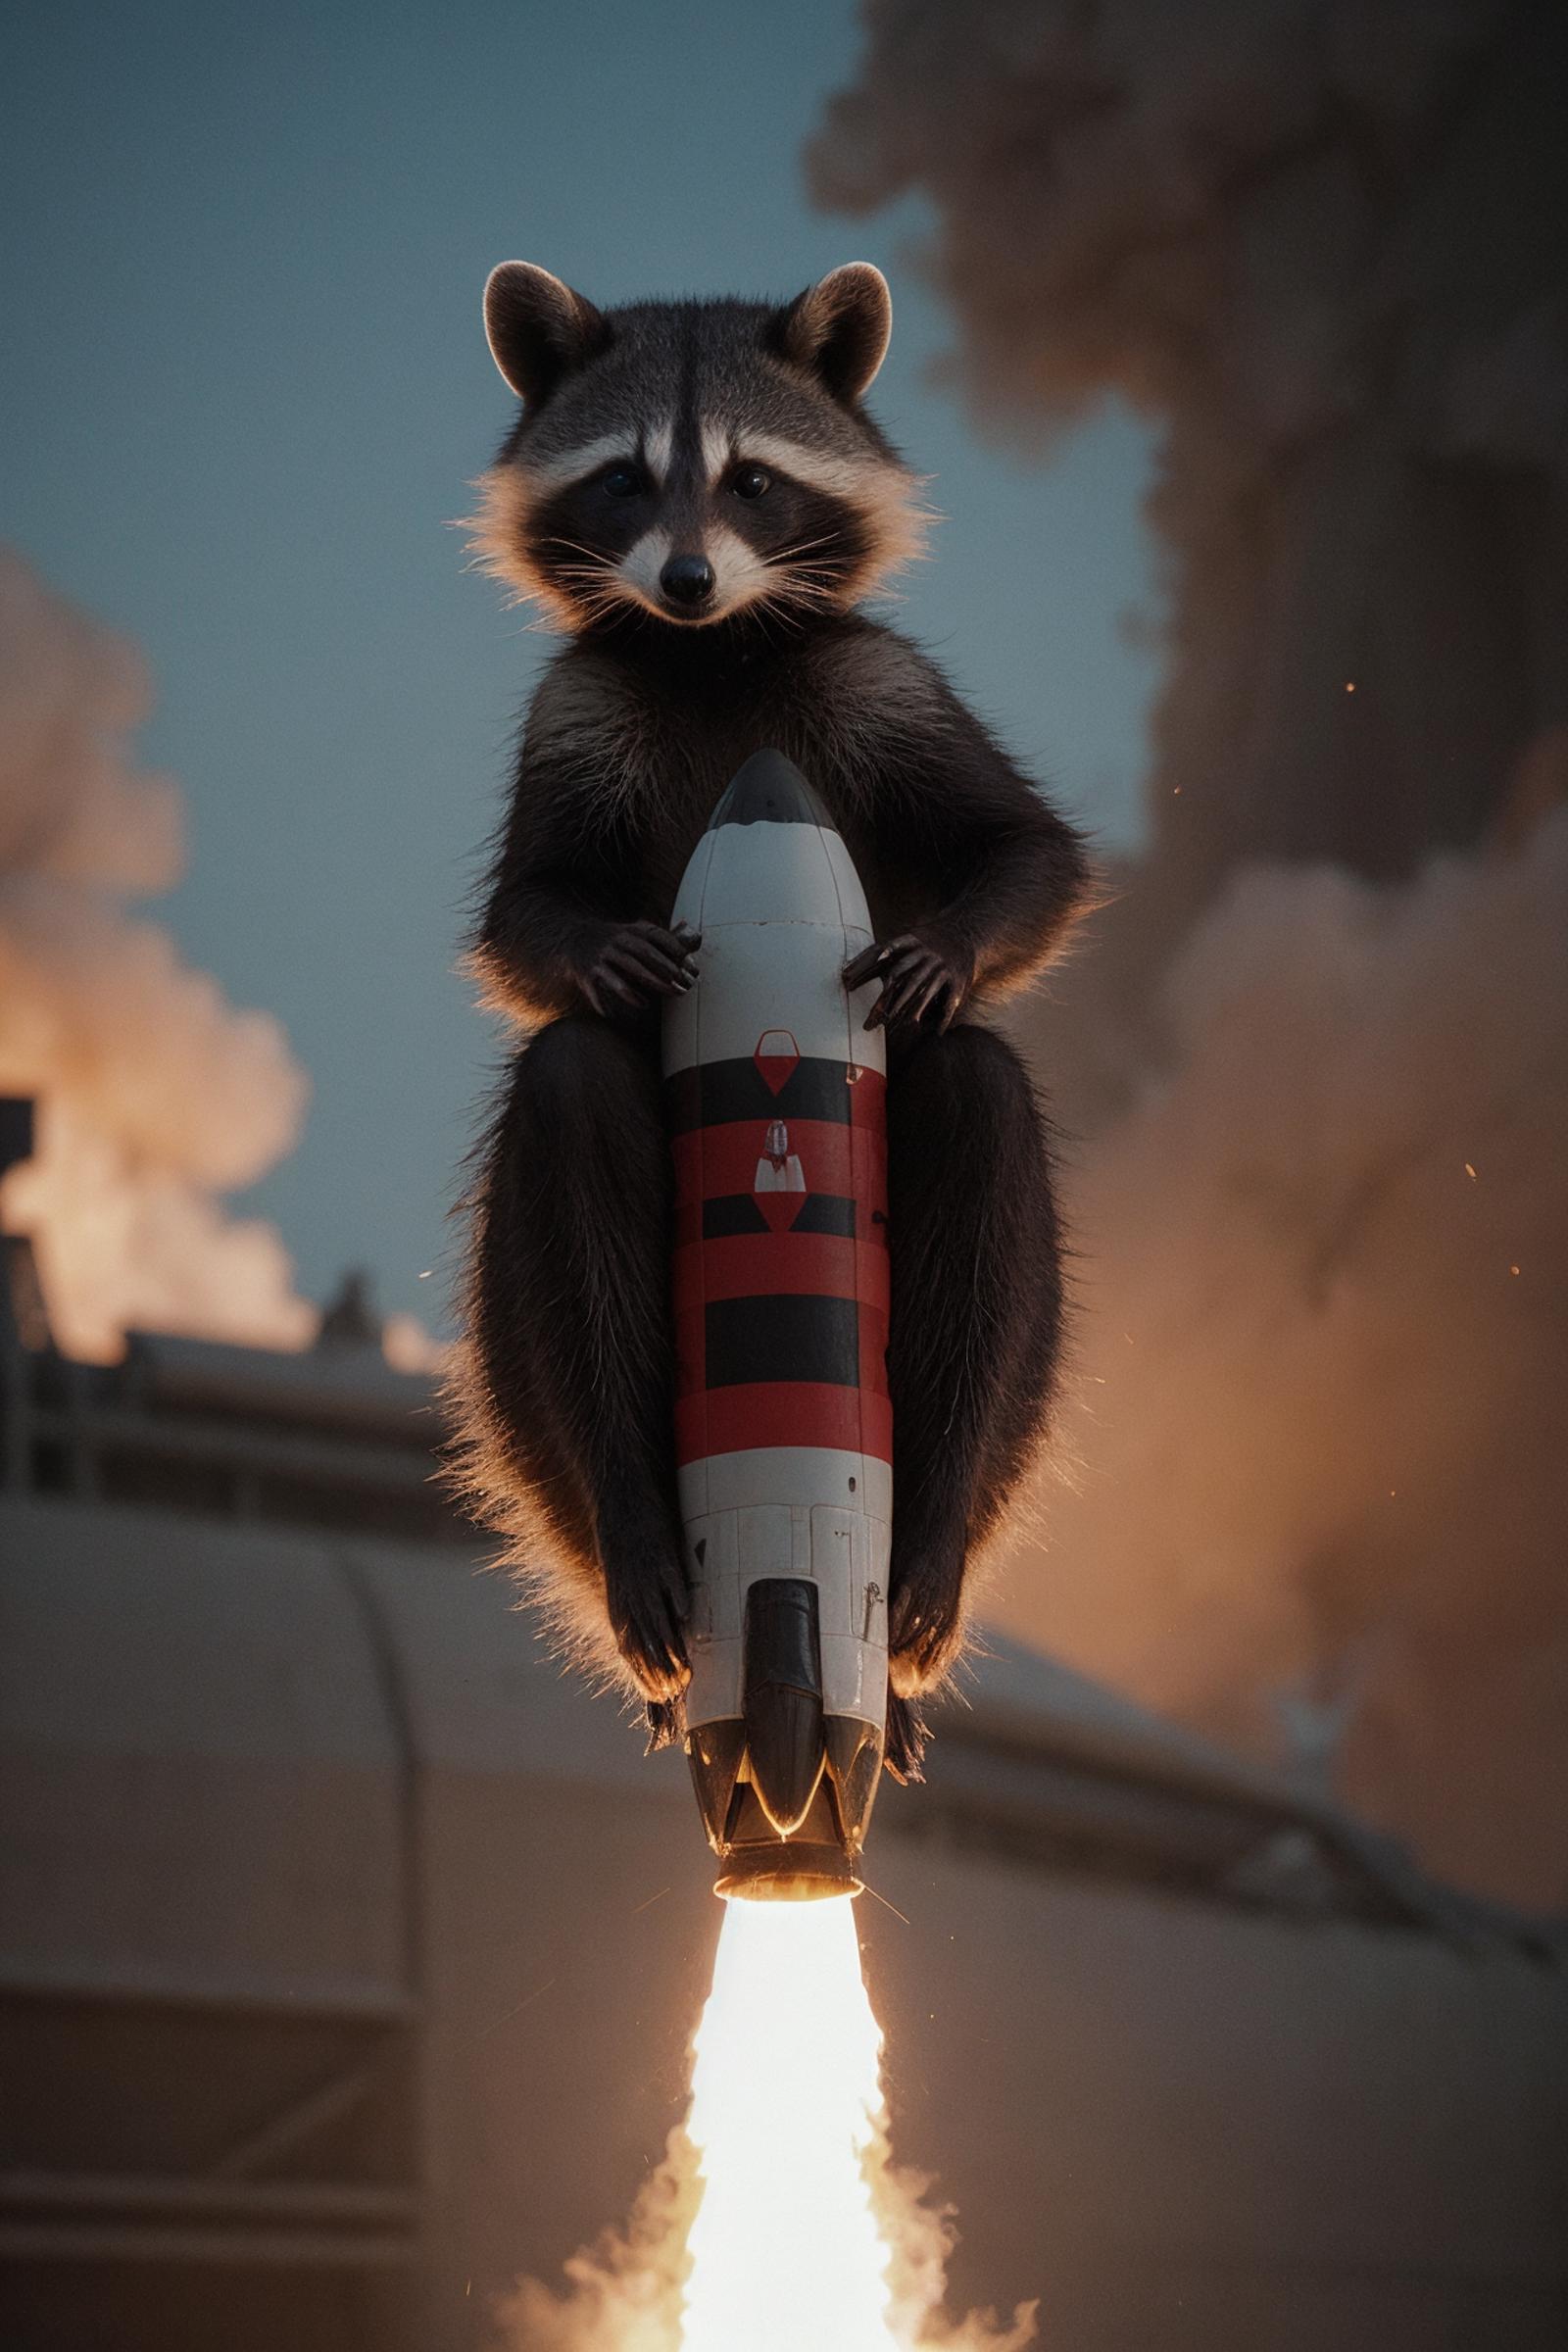 A raccoon sitting on top of a rocket.